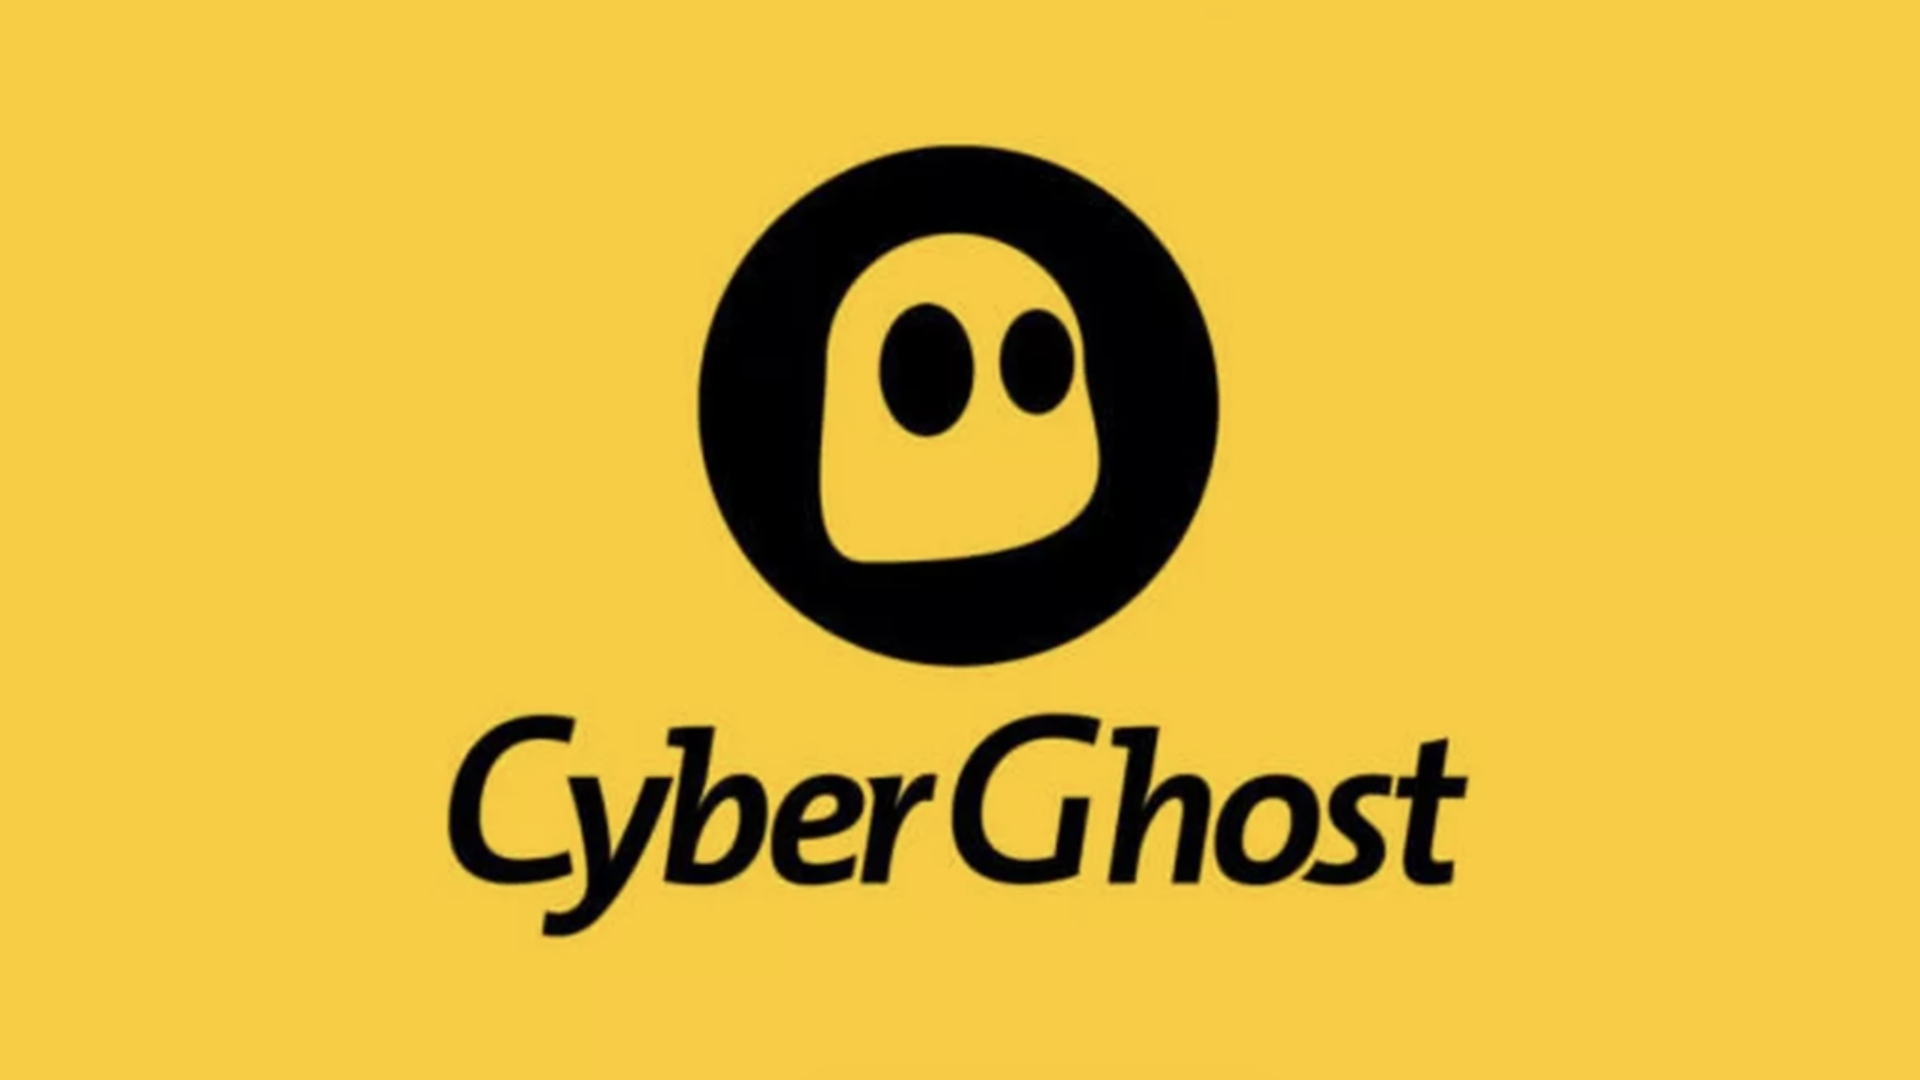 Best VPN for Japan: CyberGhost. Image shows company logo.